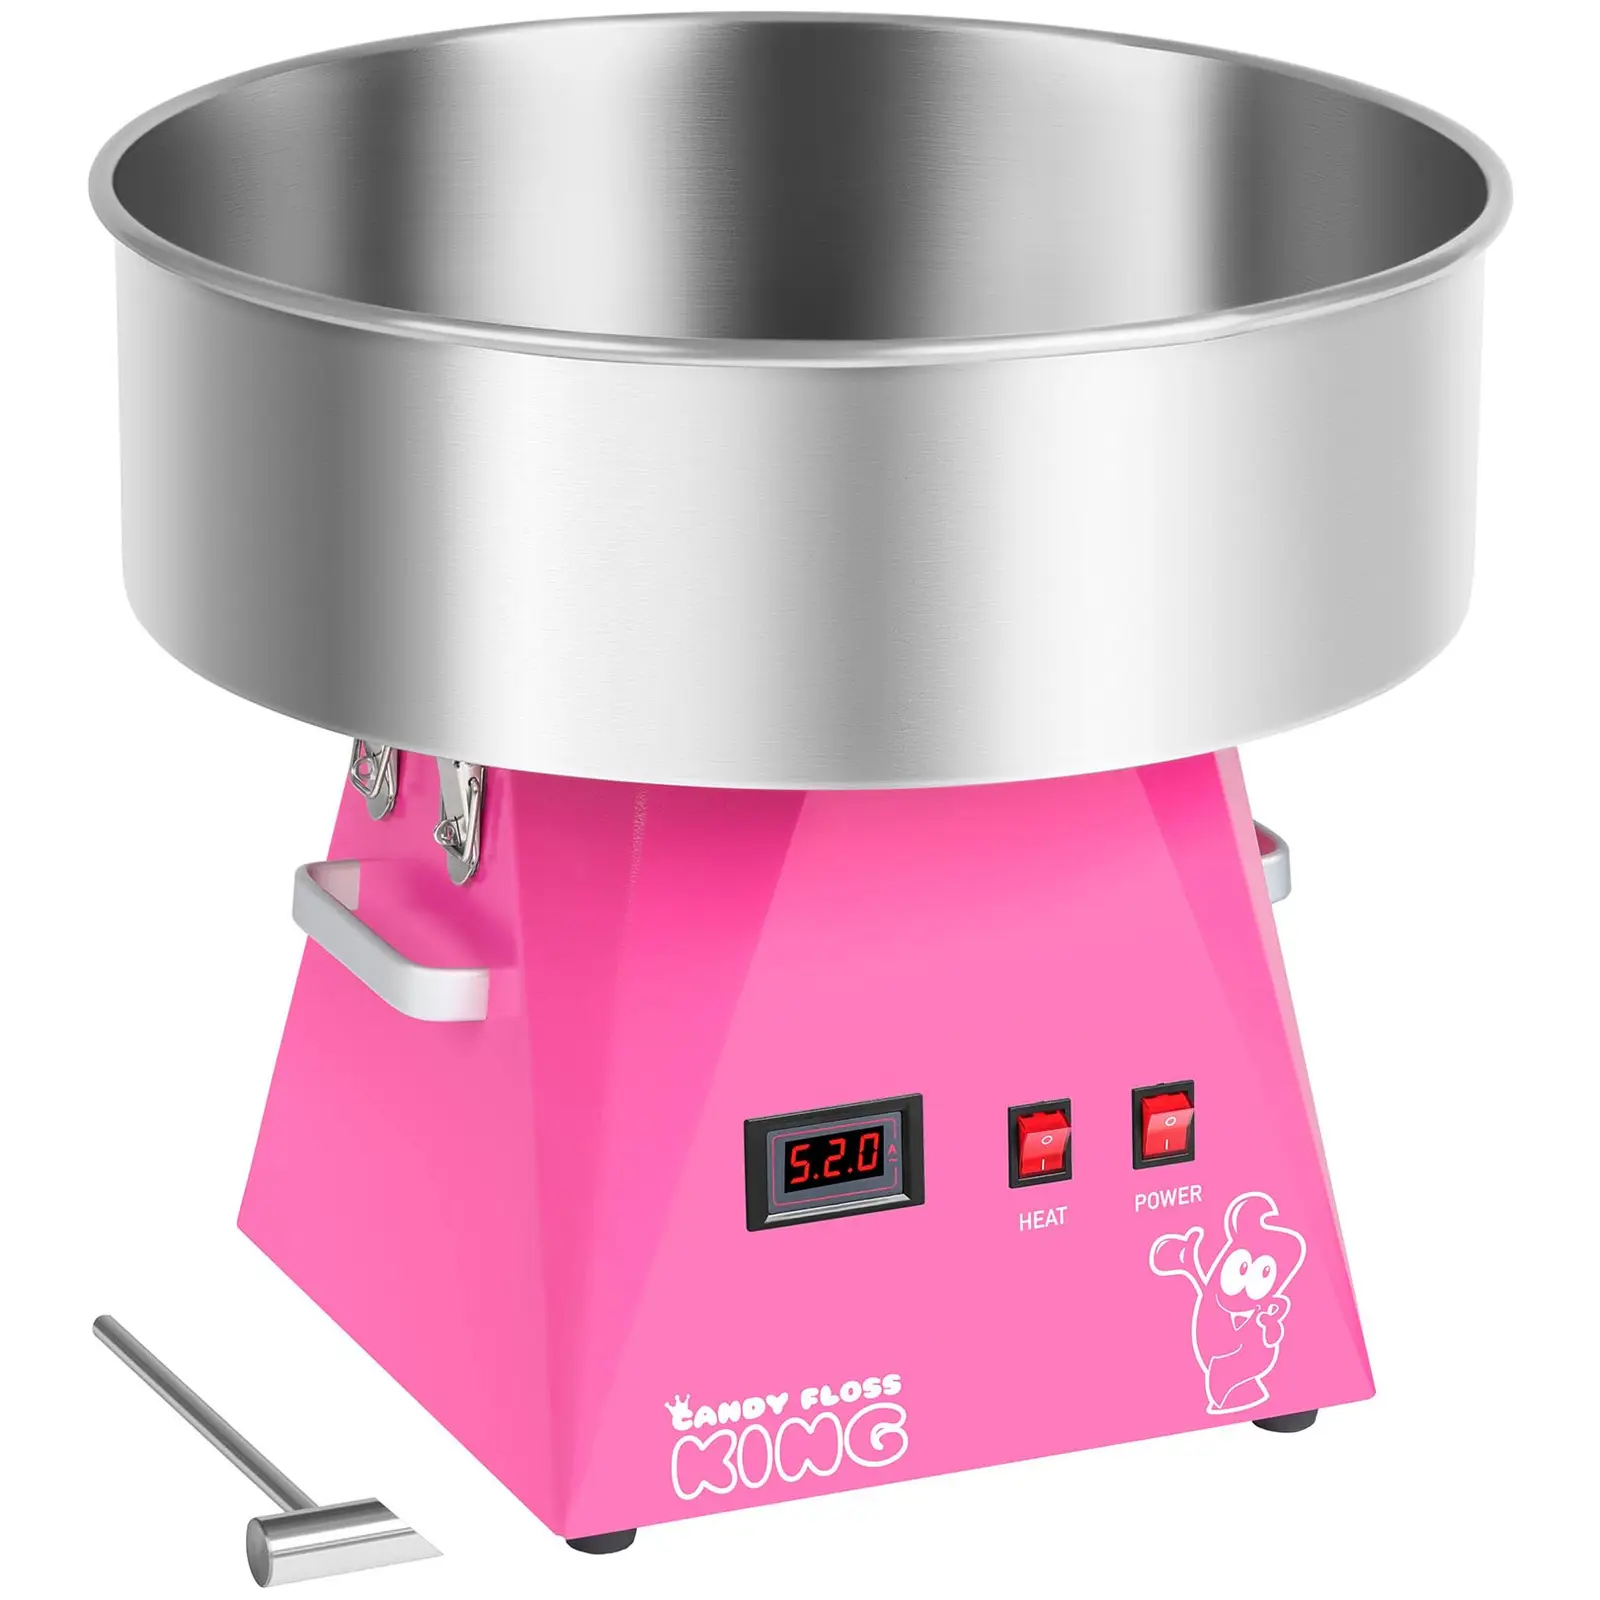 Candy Floss Machine Set with Cart - 52 cm - Pink/White